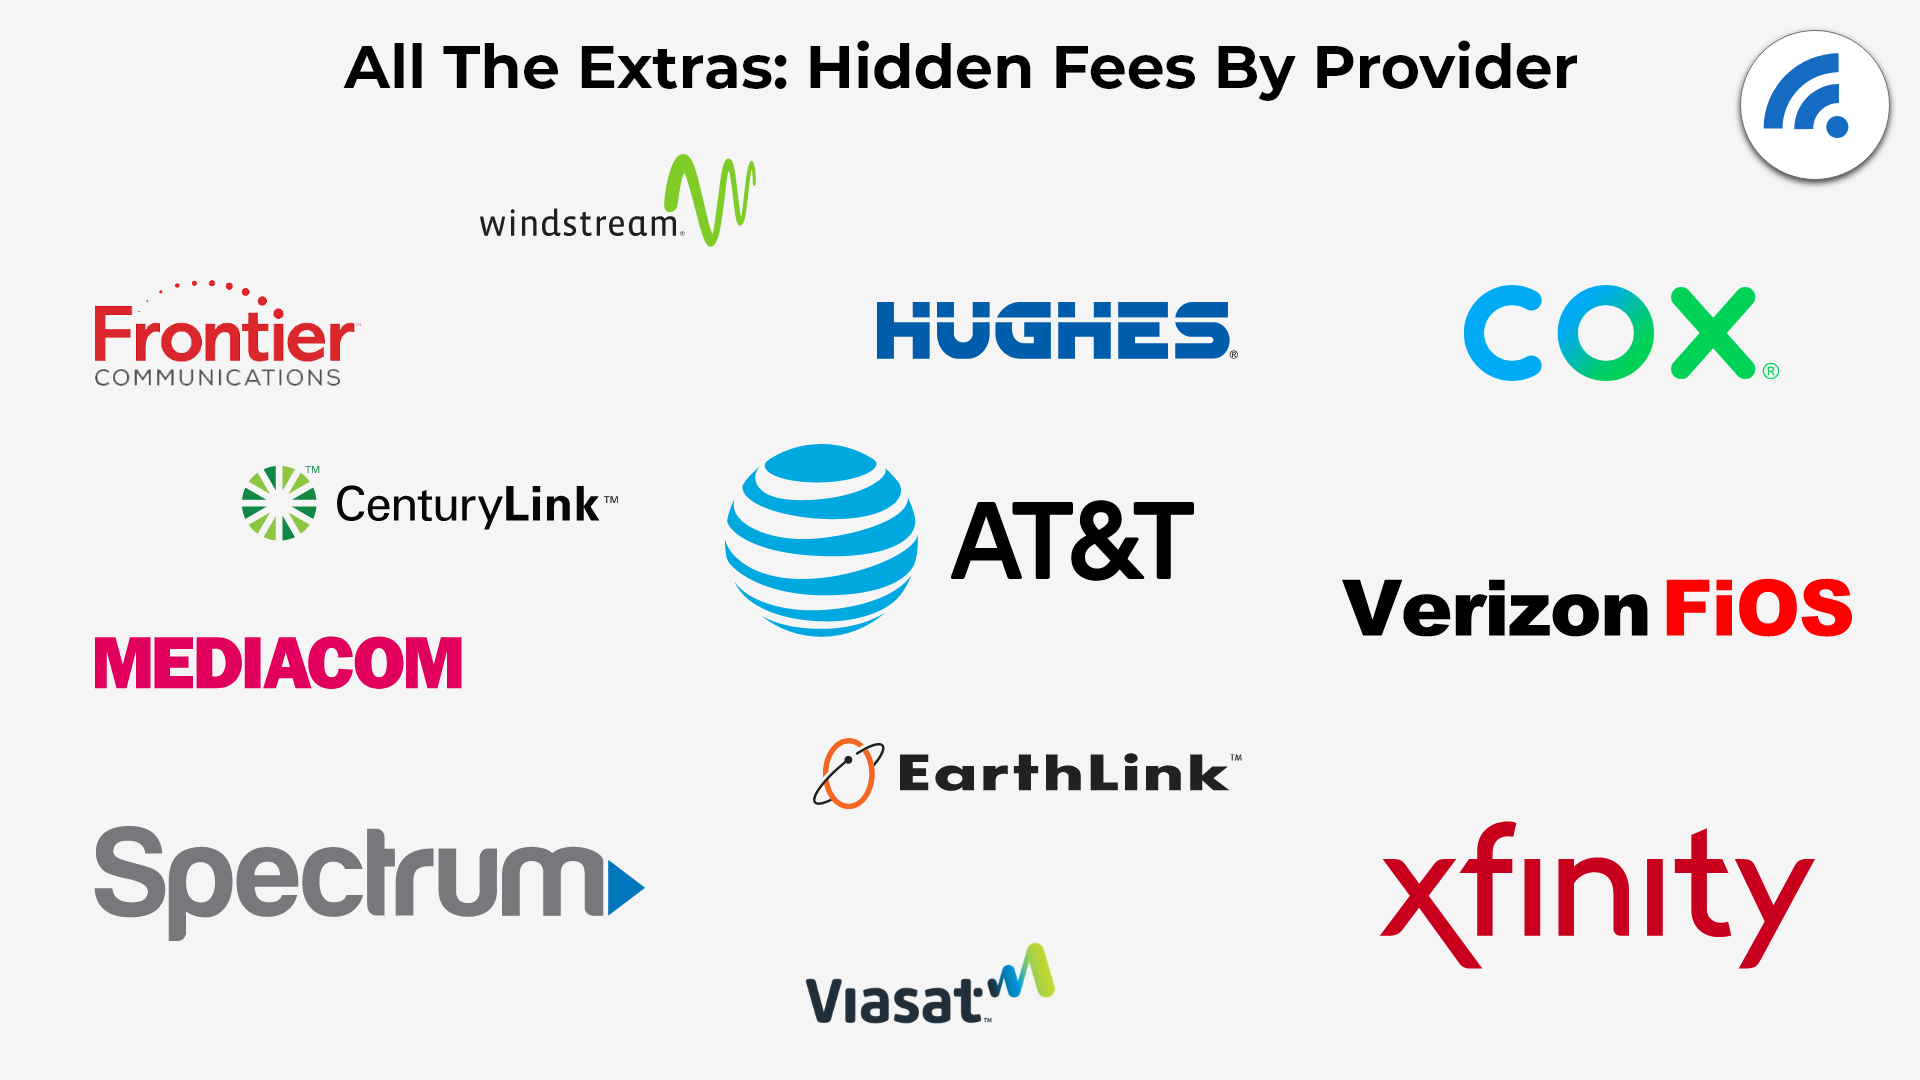 All The Extras: Hidden Fees By Provider